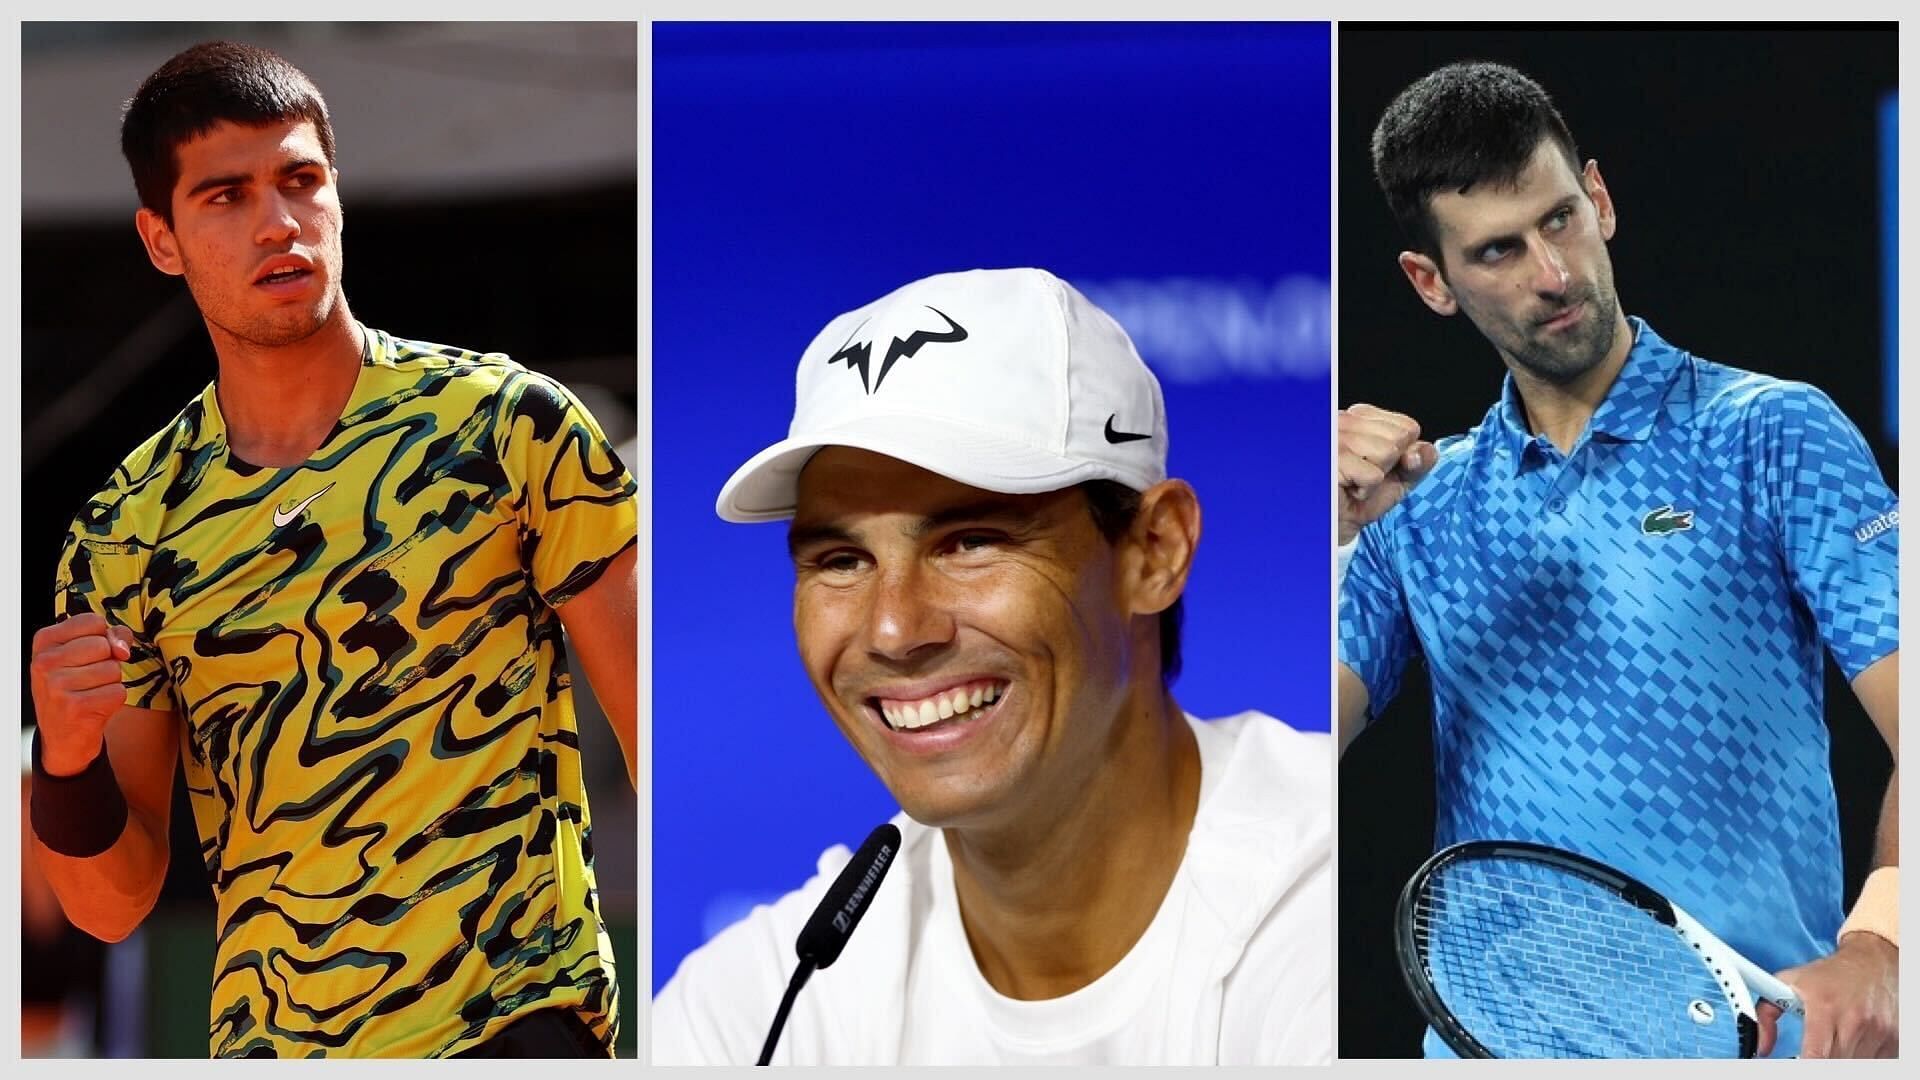 A number of players have predicted Nadal to have a strong comeback 